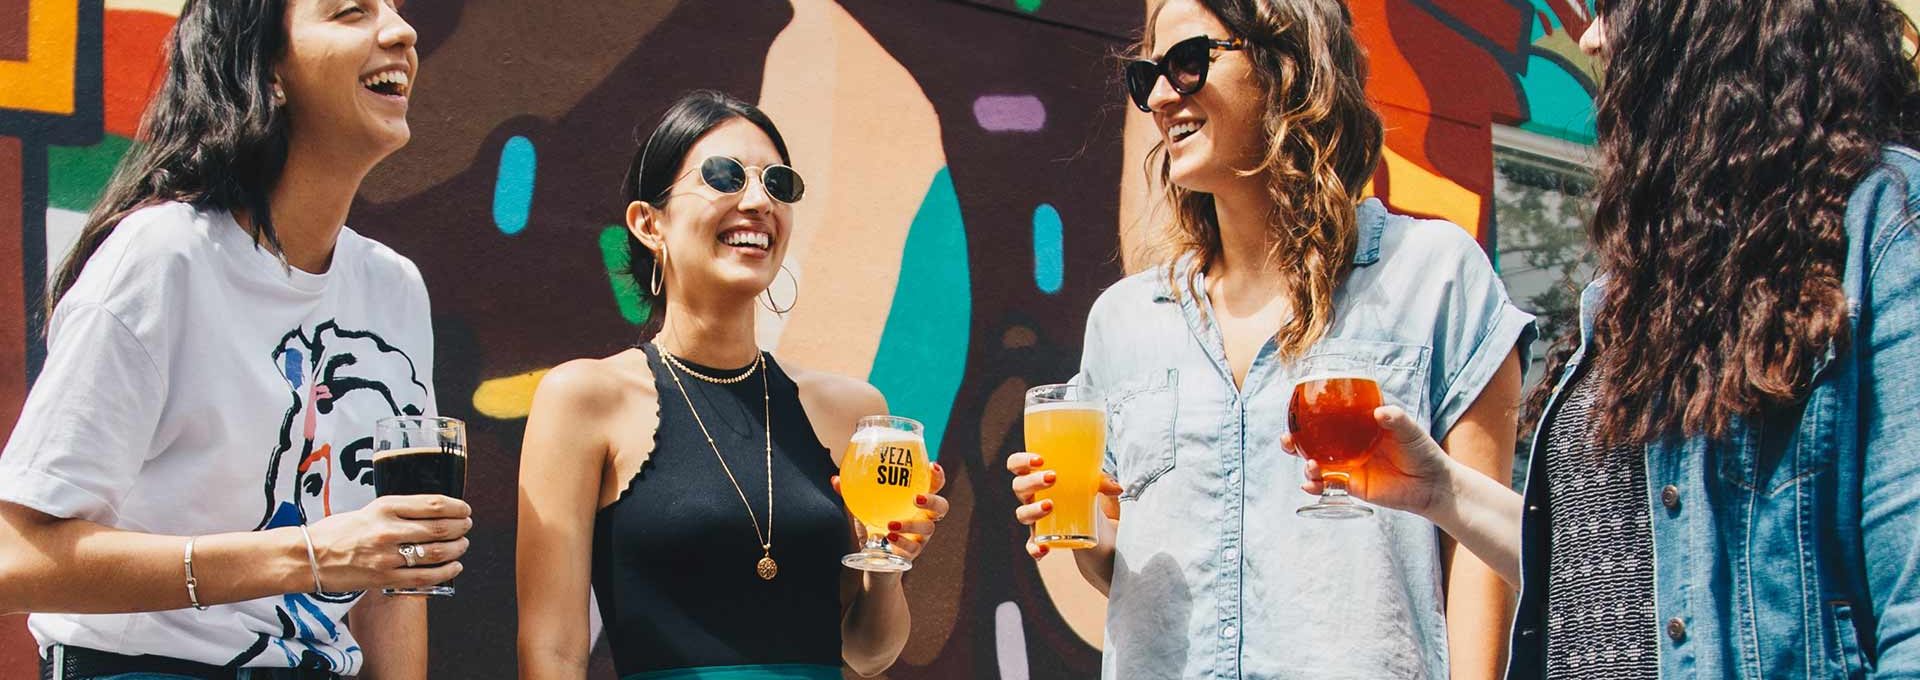 Friends having drinks in front of a colorful mural wall